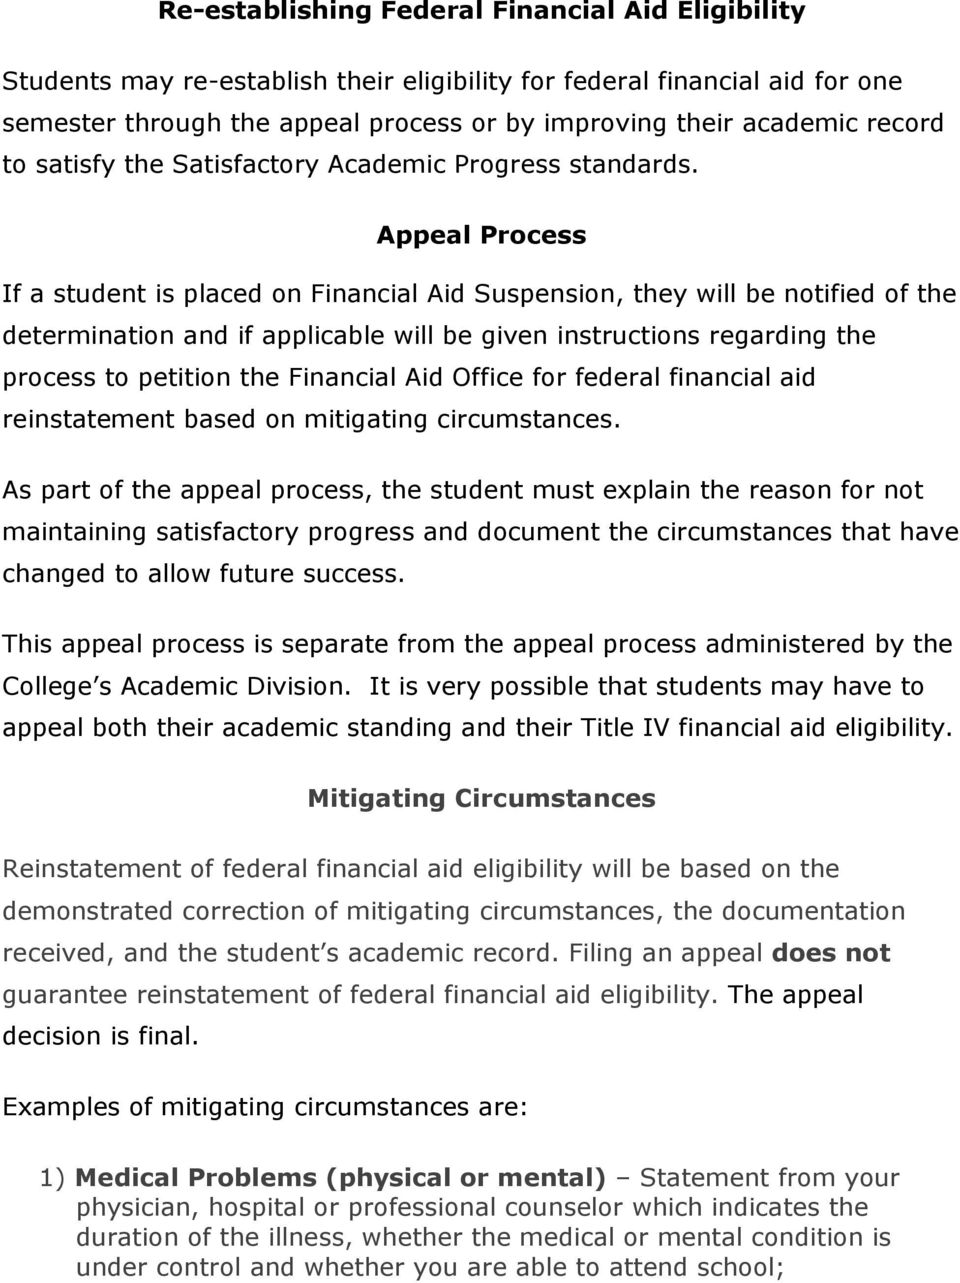 Appeal Process If a student is placed on Financial Aid Suspension, they will be notified of the determination and if applicable will be given instructions regarding the process to petition the